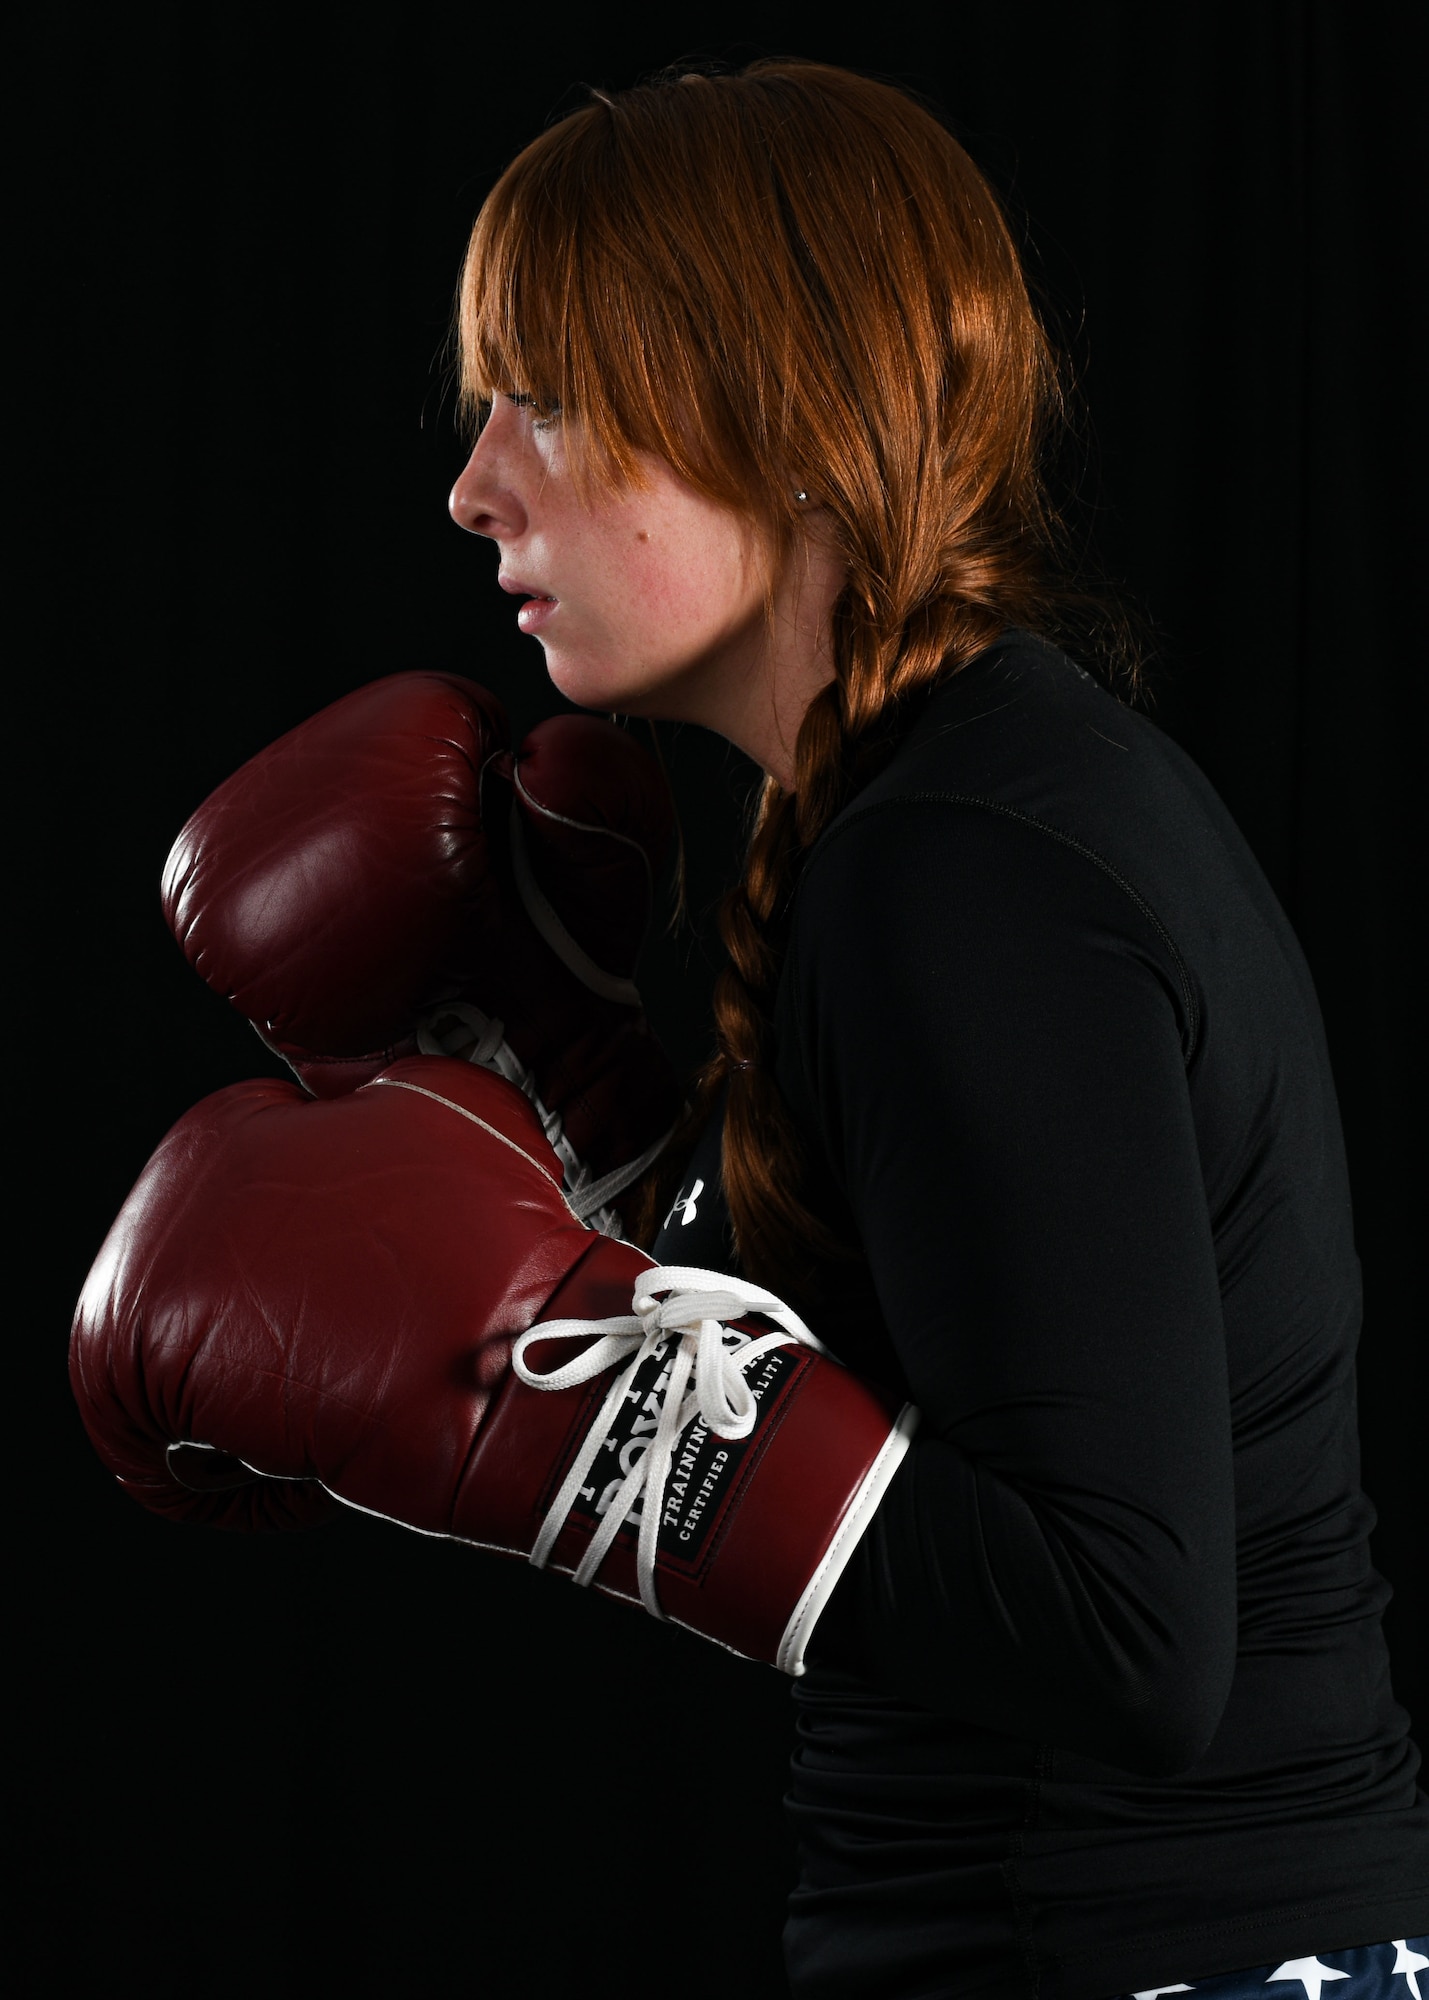 Senior Airman Sarah Jane Gruber, a broadcast journalist for the 910th Public Affairs Office, poses for a photo in her boxing attire, July 11, 2020, Youngstown Air Reserve Station. Gruber competes in Women’s Amateur Boxing for USA Boxing’s Great Lakes Region and has trained in boxing for four years.